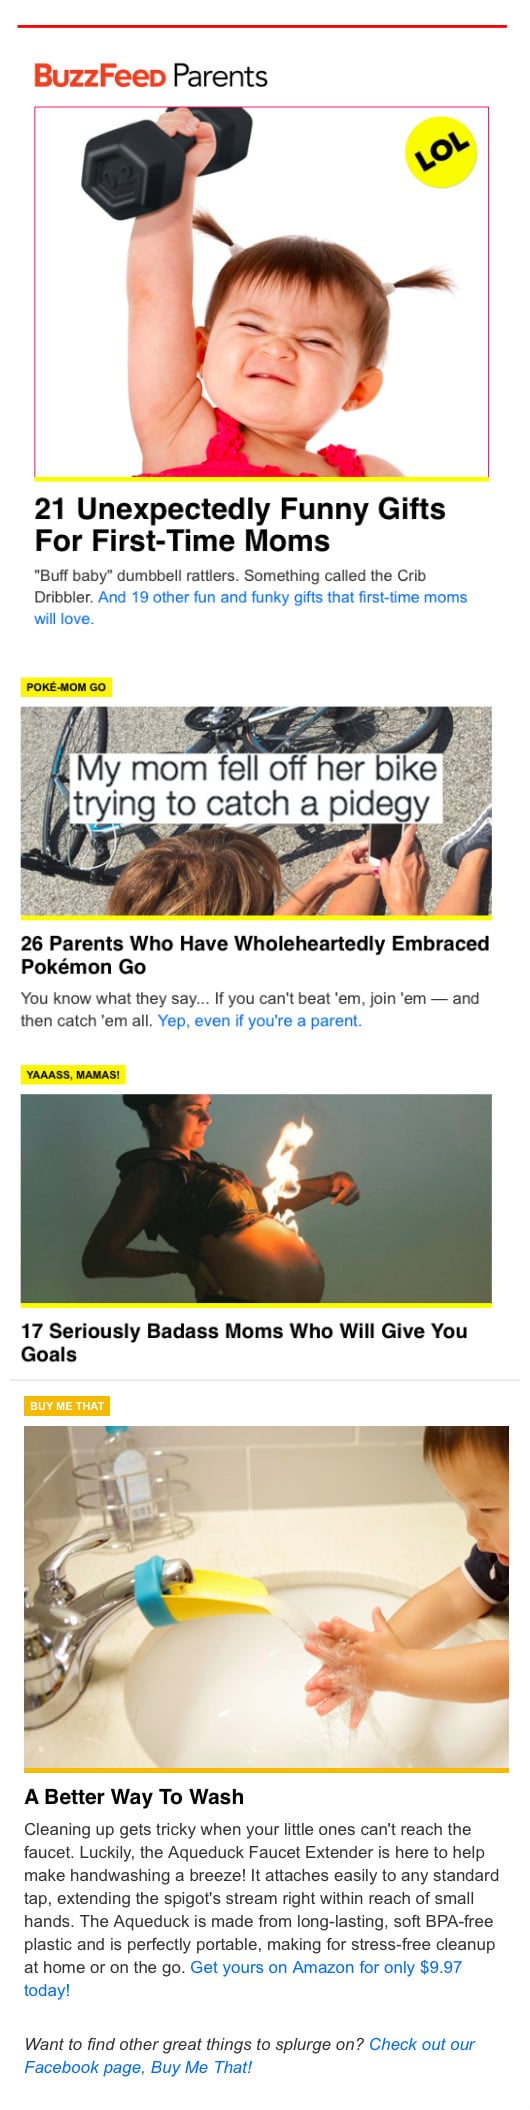 BuzzFeed Write a teaser for each article